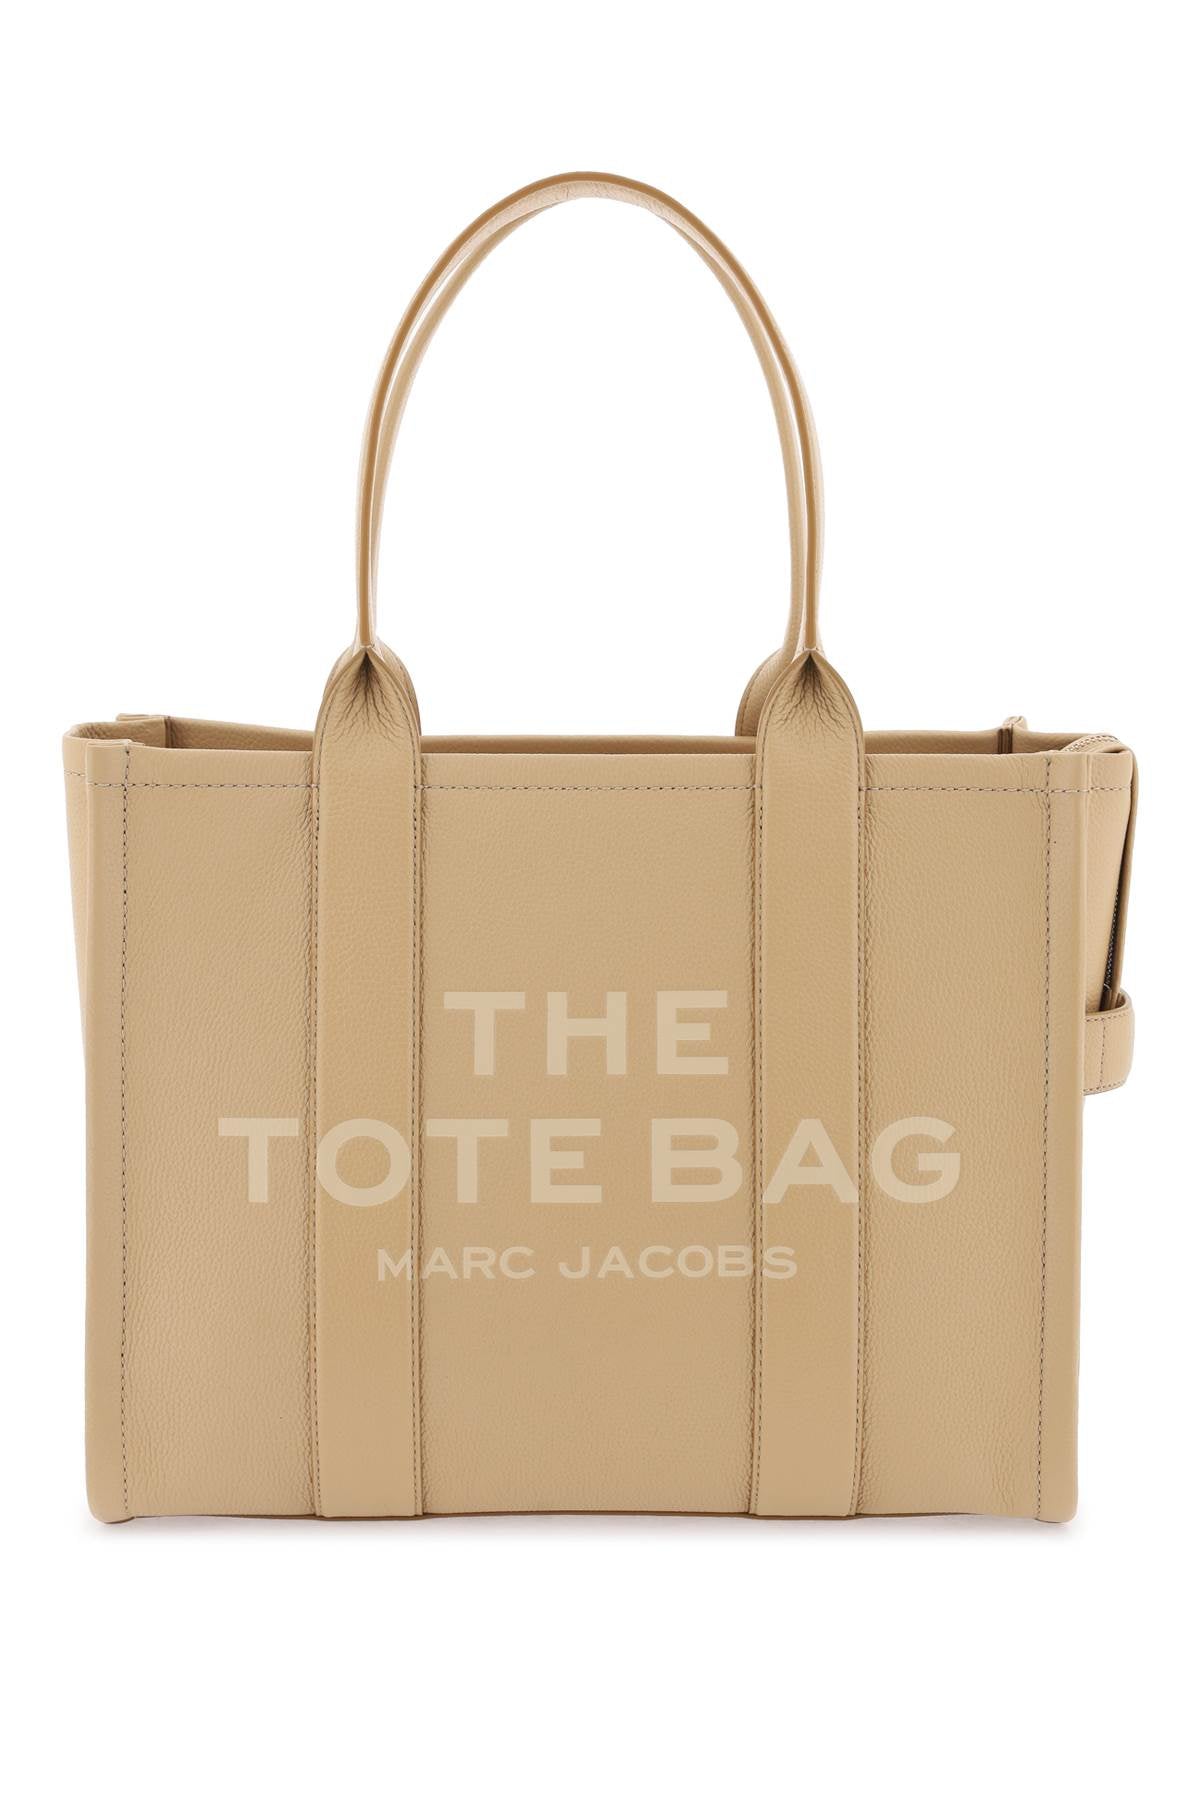 Marc jacobs the leather large tote bag-0